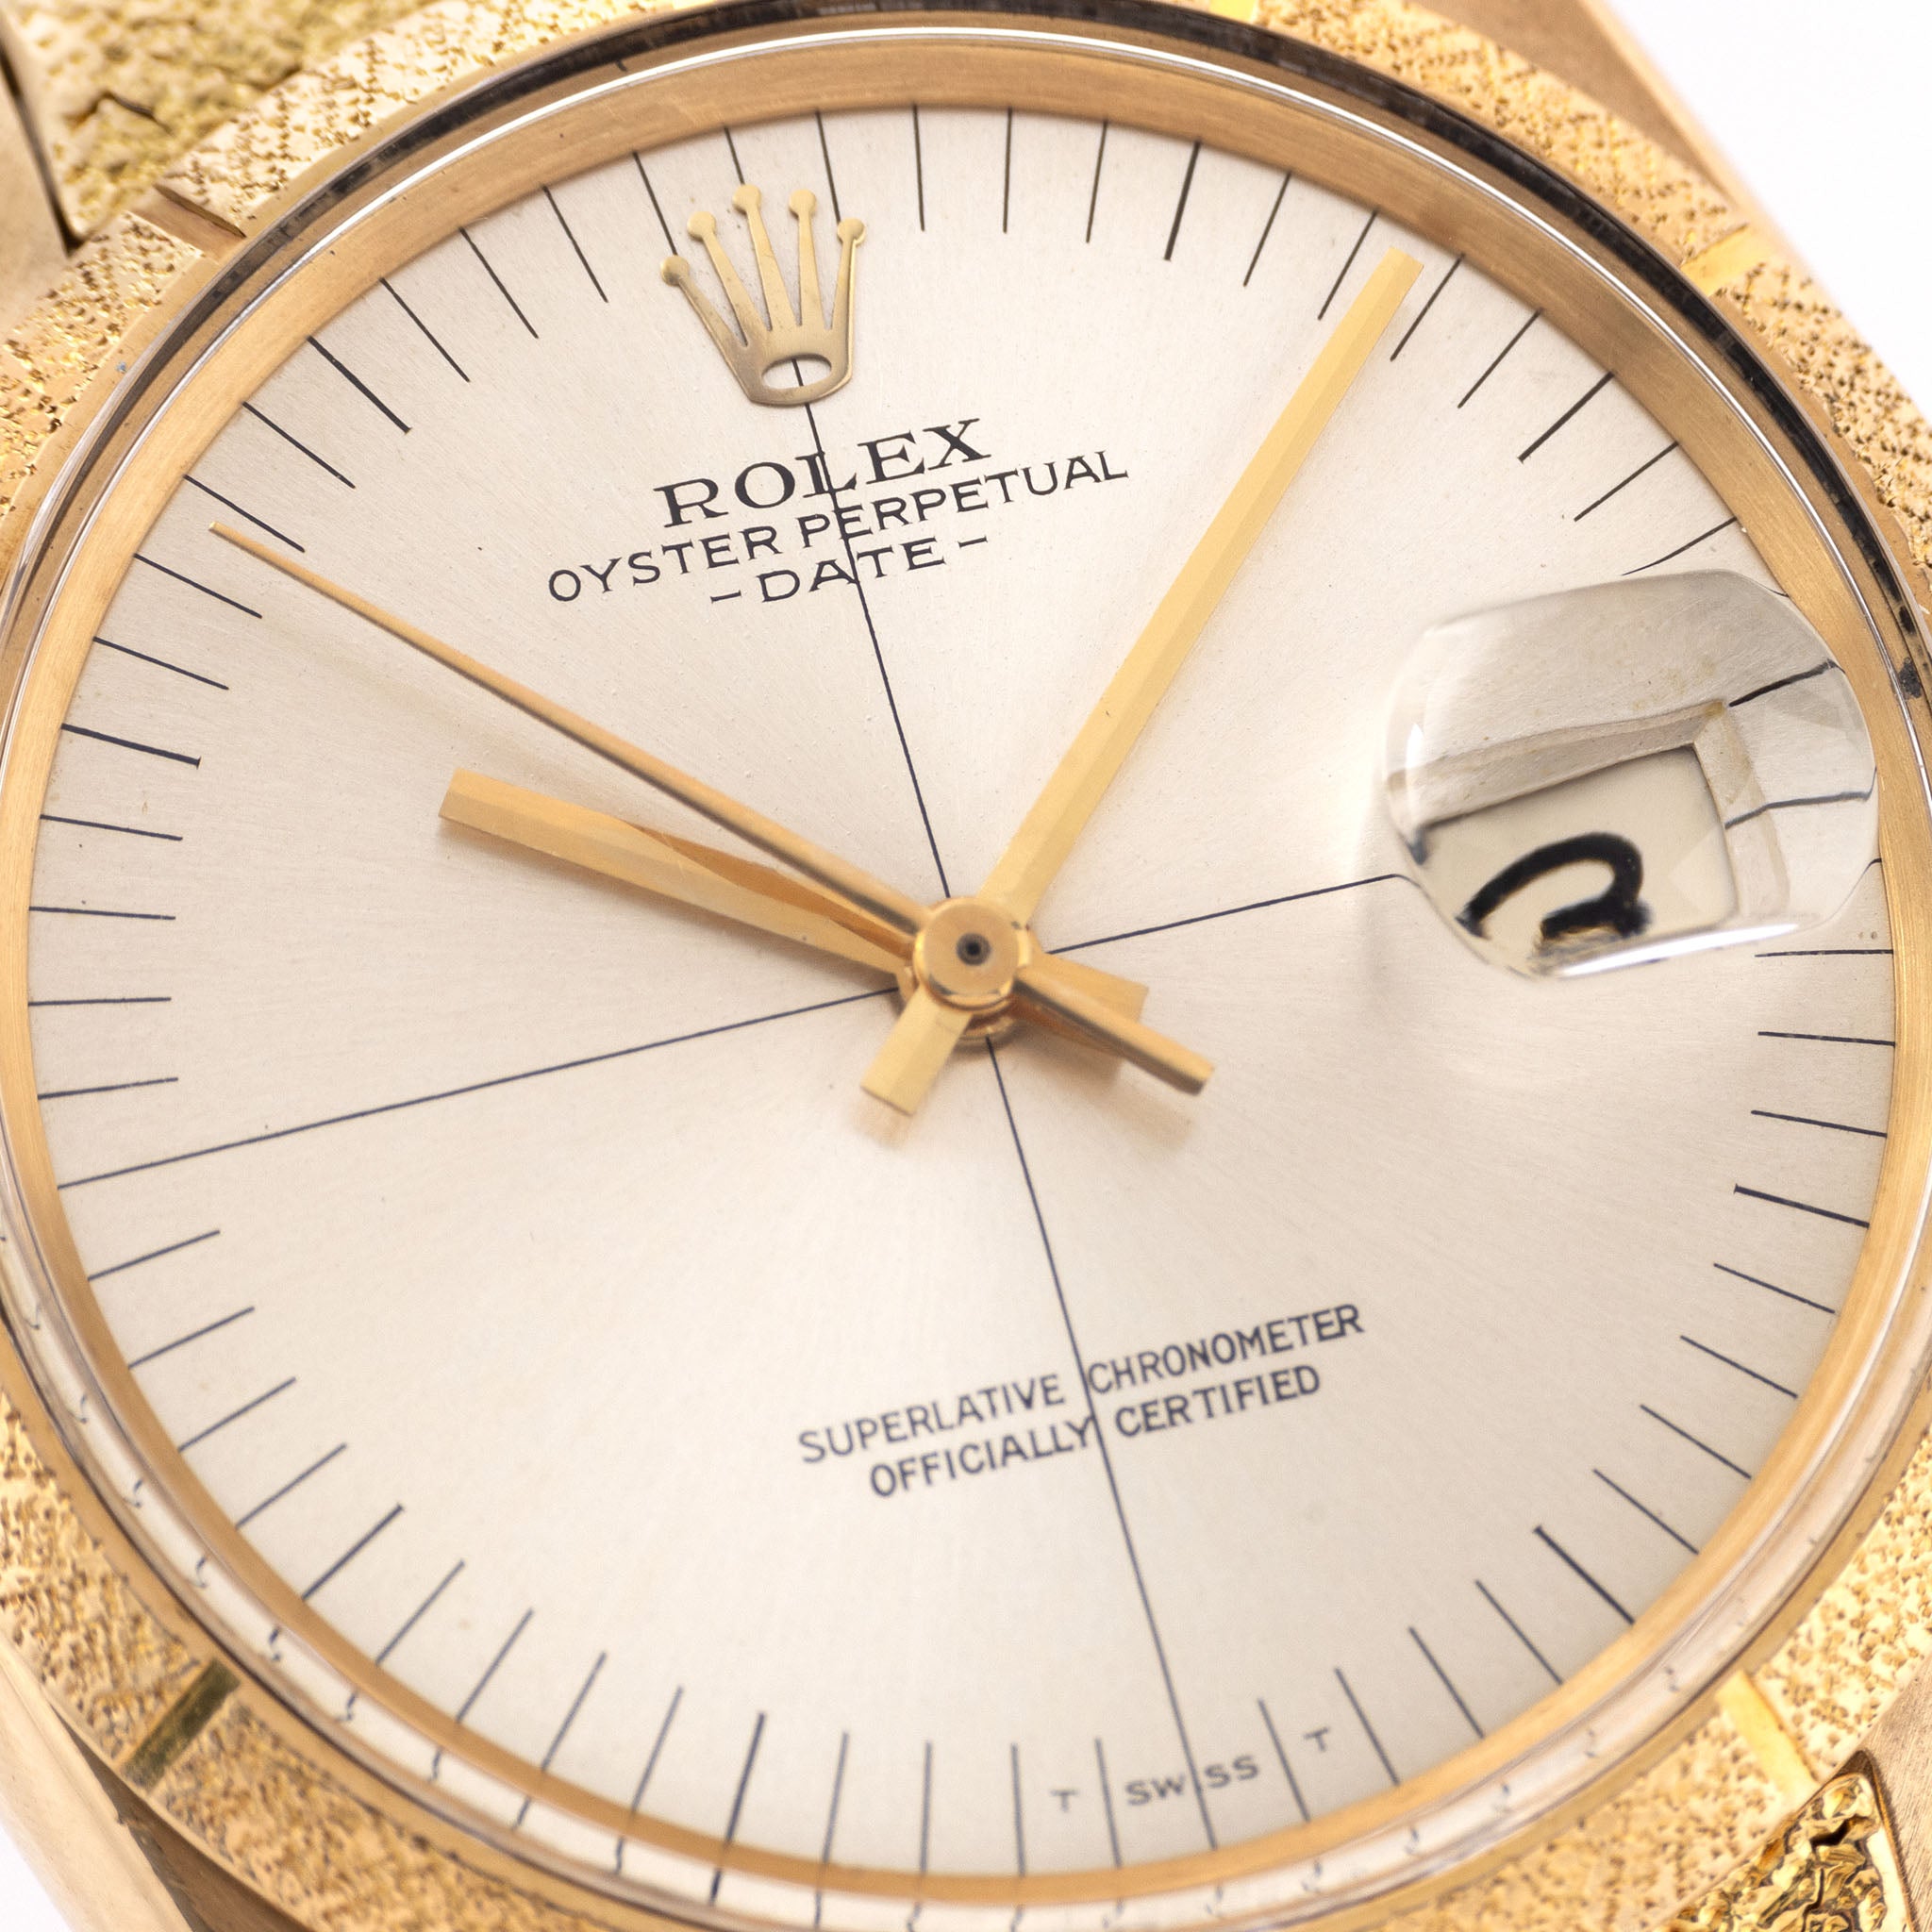 Rolex Oyster Perpetual Date "Zephyr" 1510 morellis